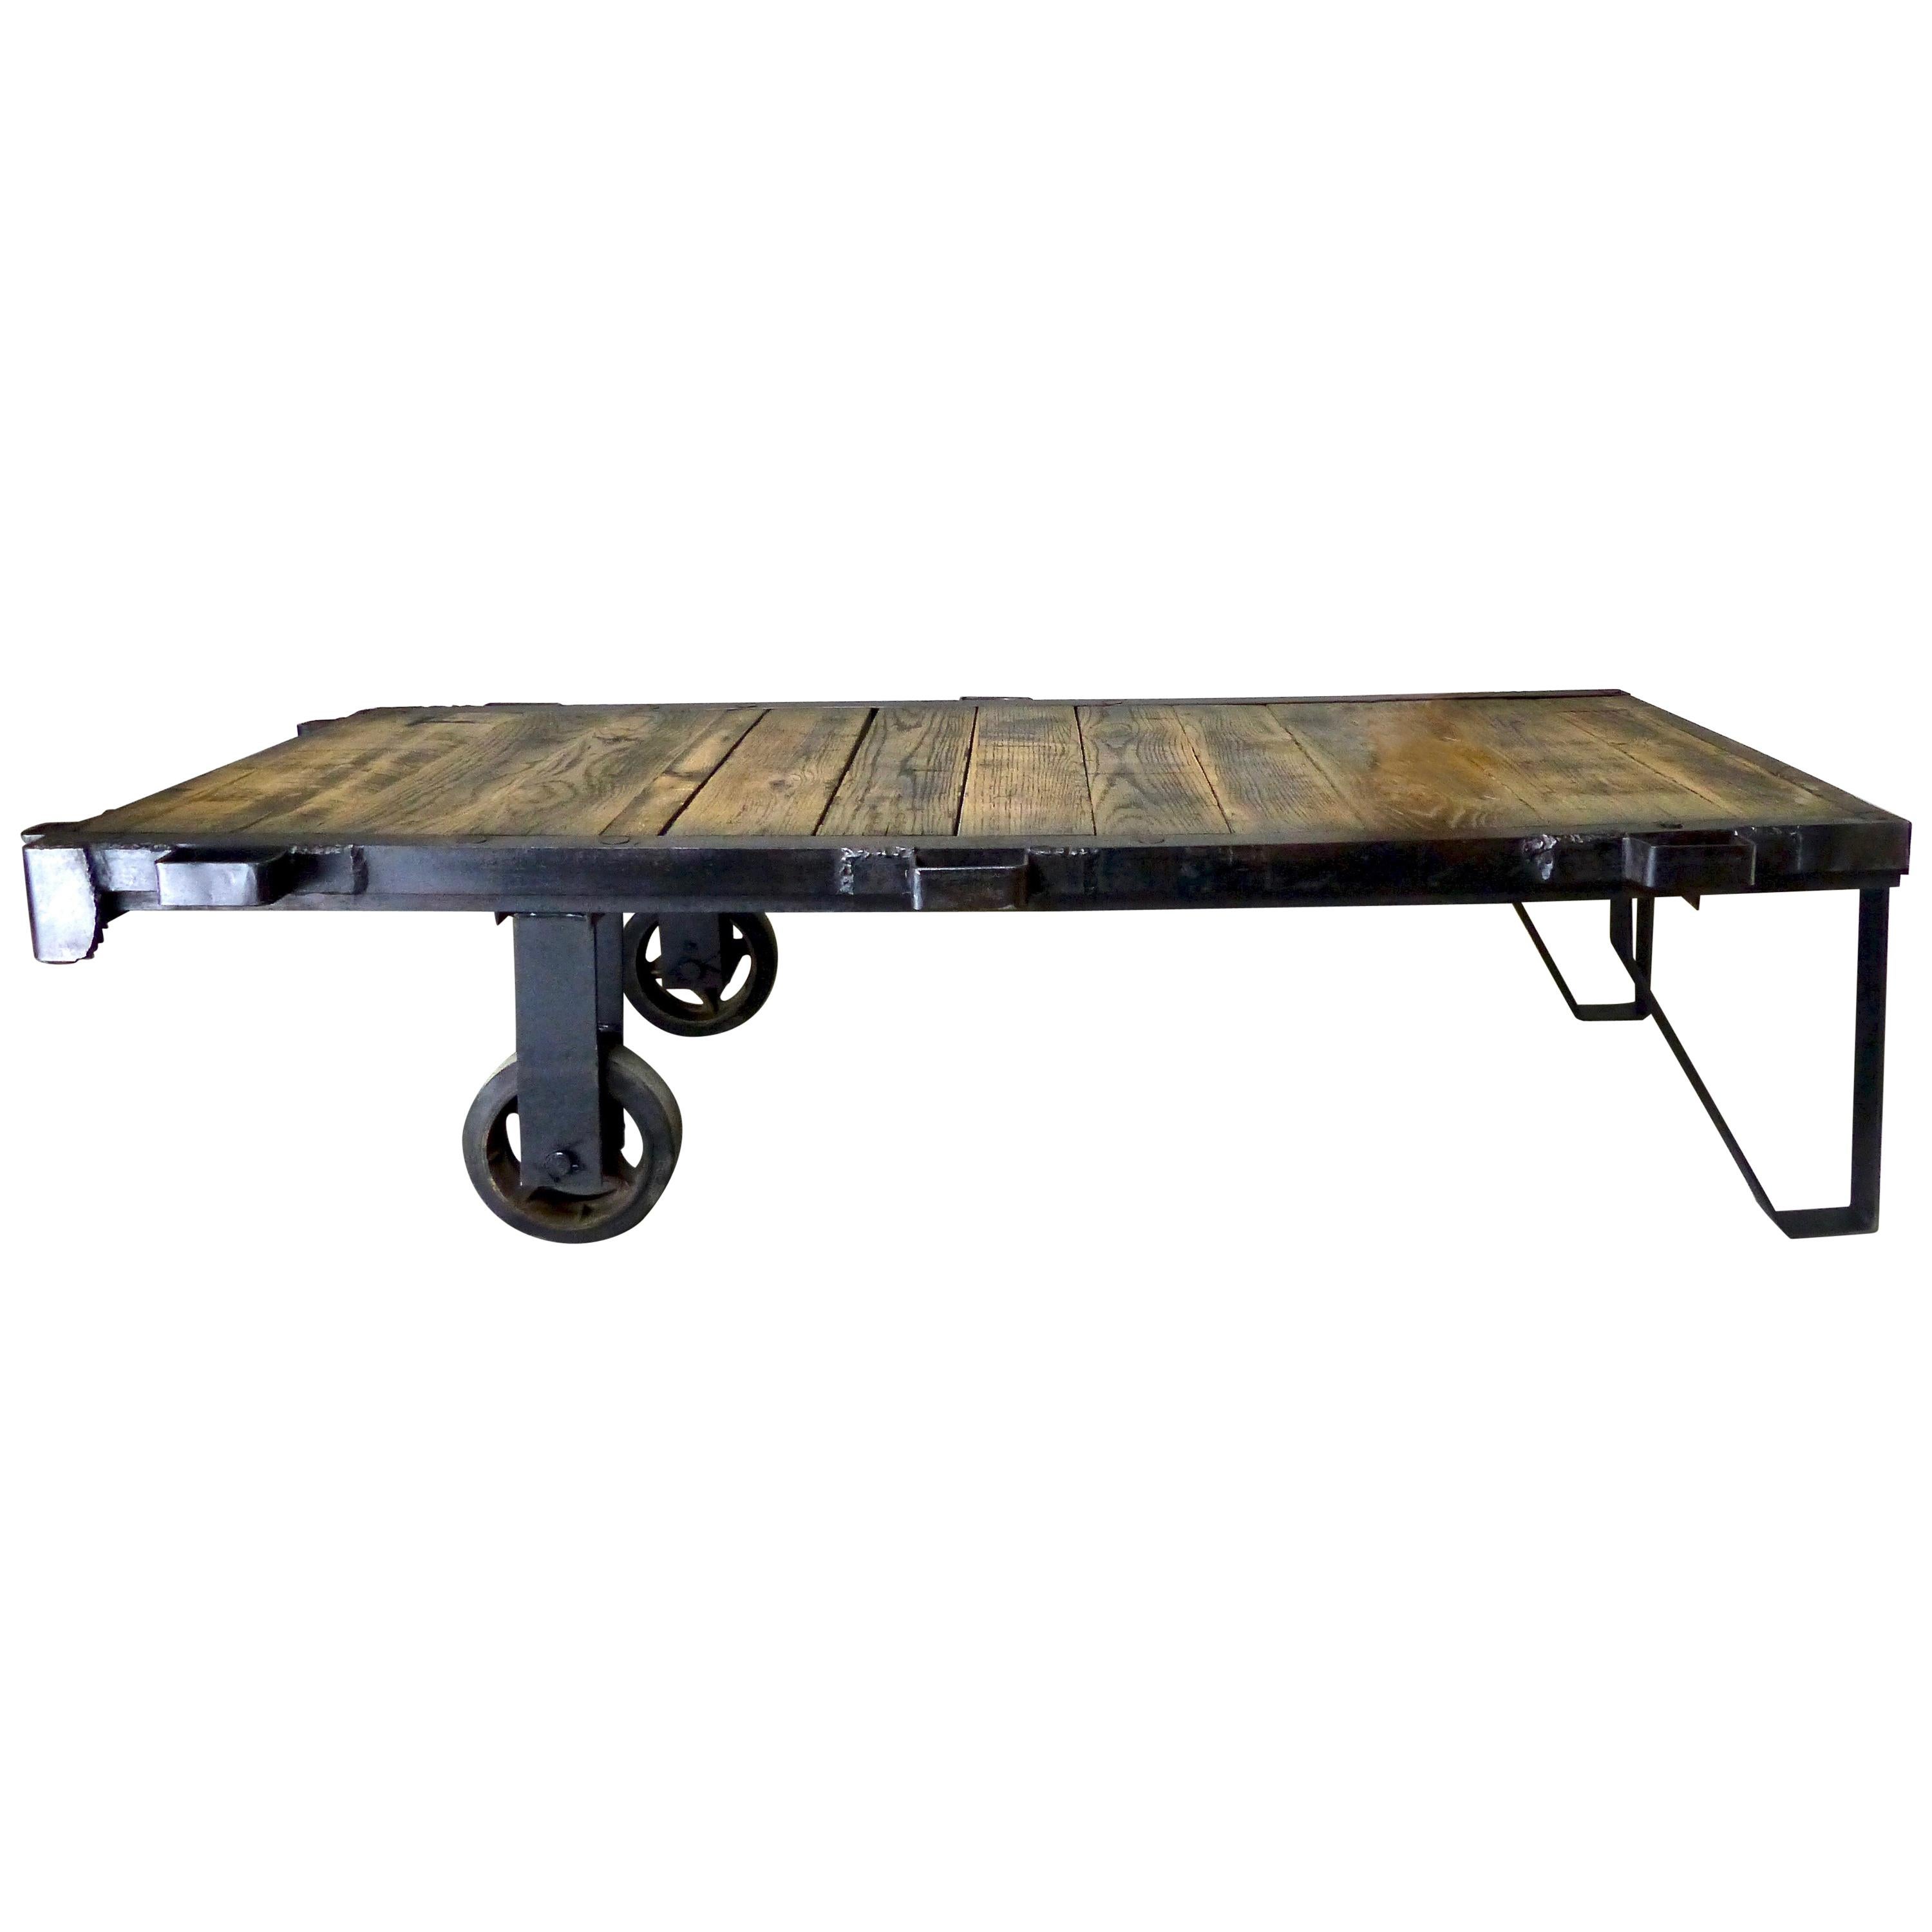 1930s Cast Iron Rolling Industrial Cart Pallet Table